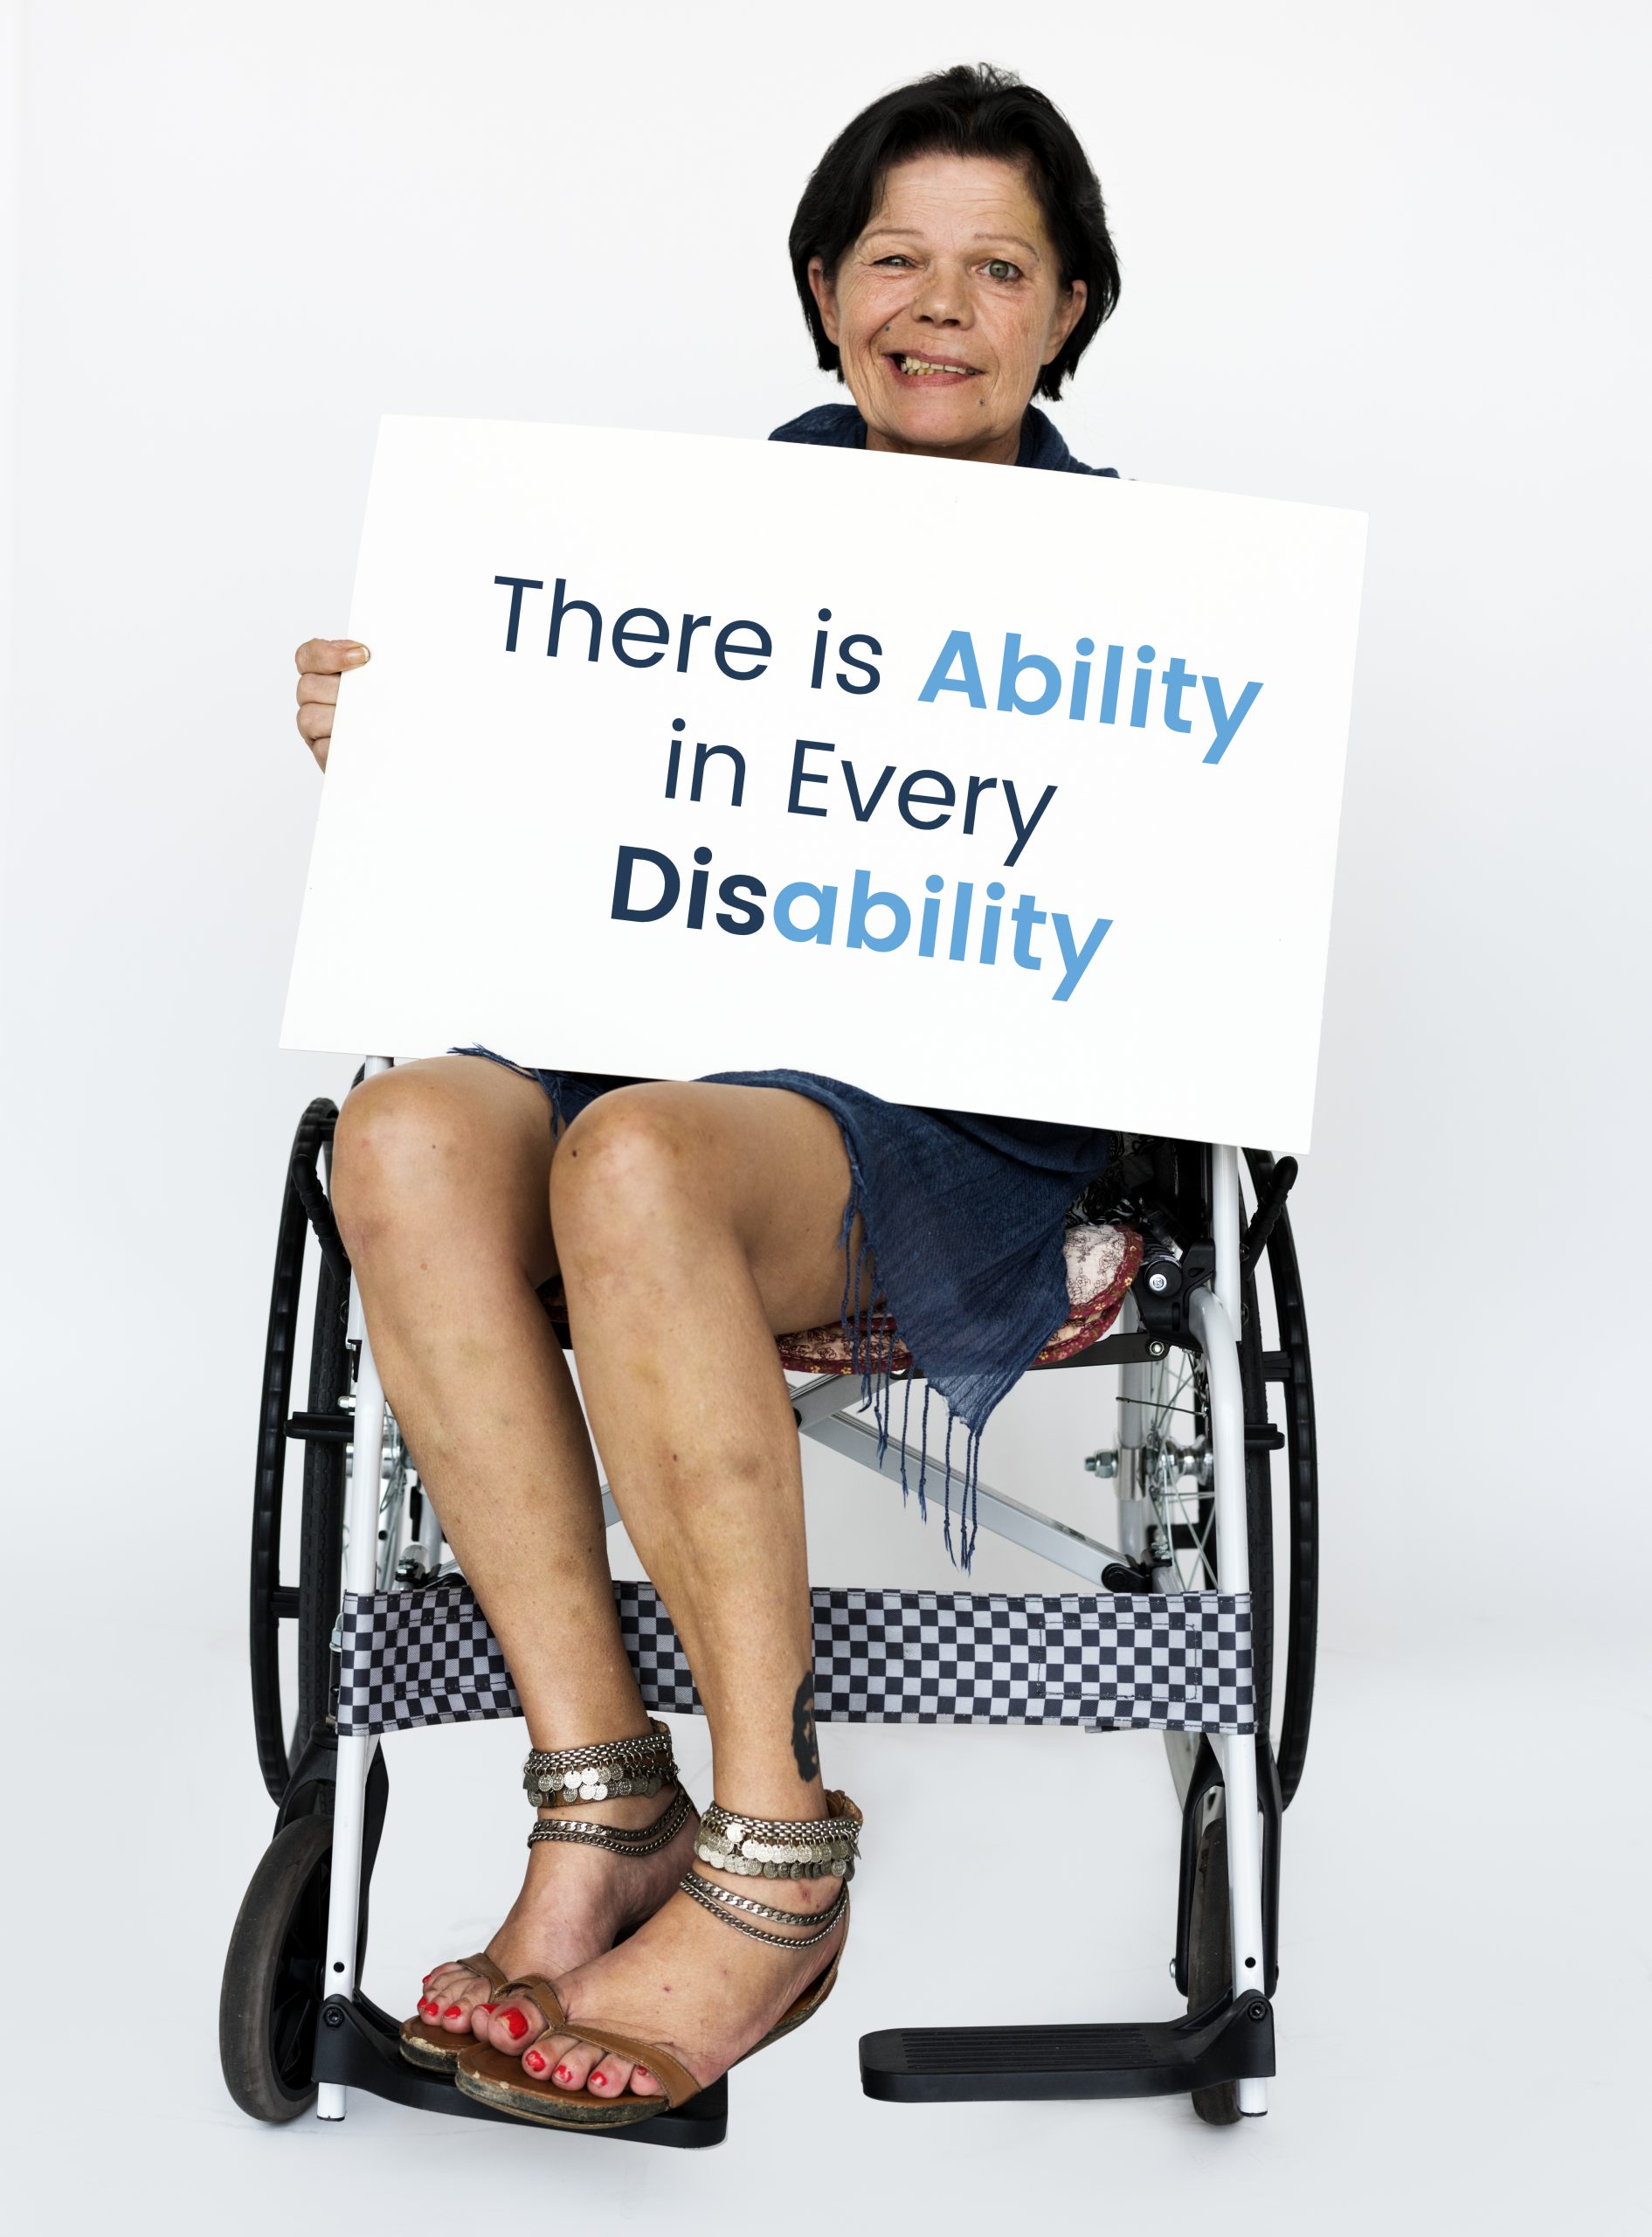 There is Ability in Every Disability sign being held by a woman in a wheelchair